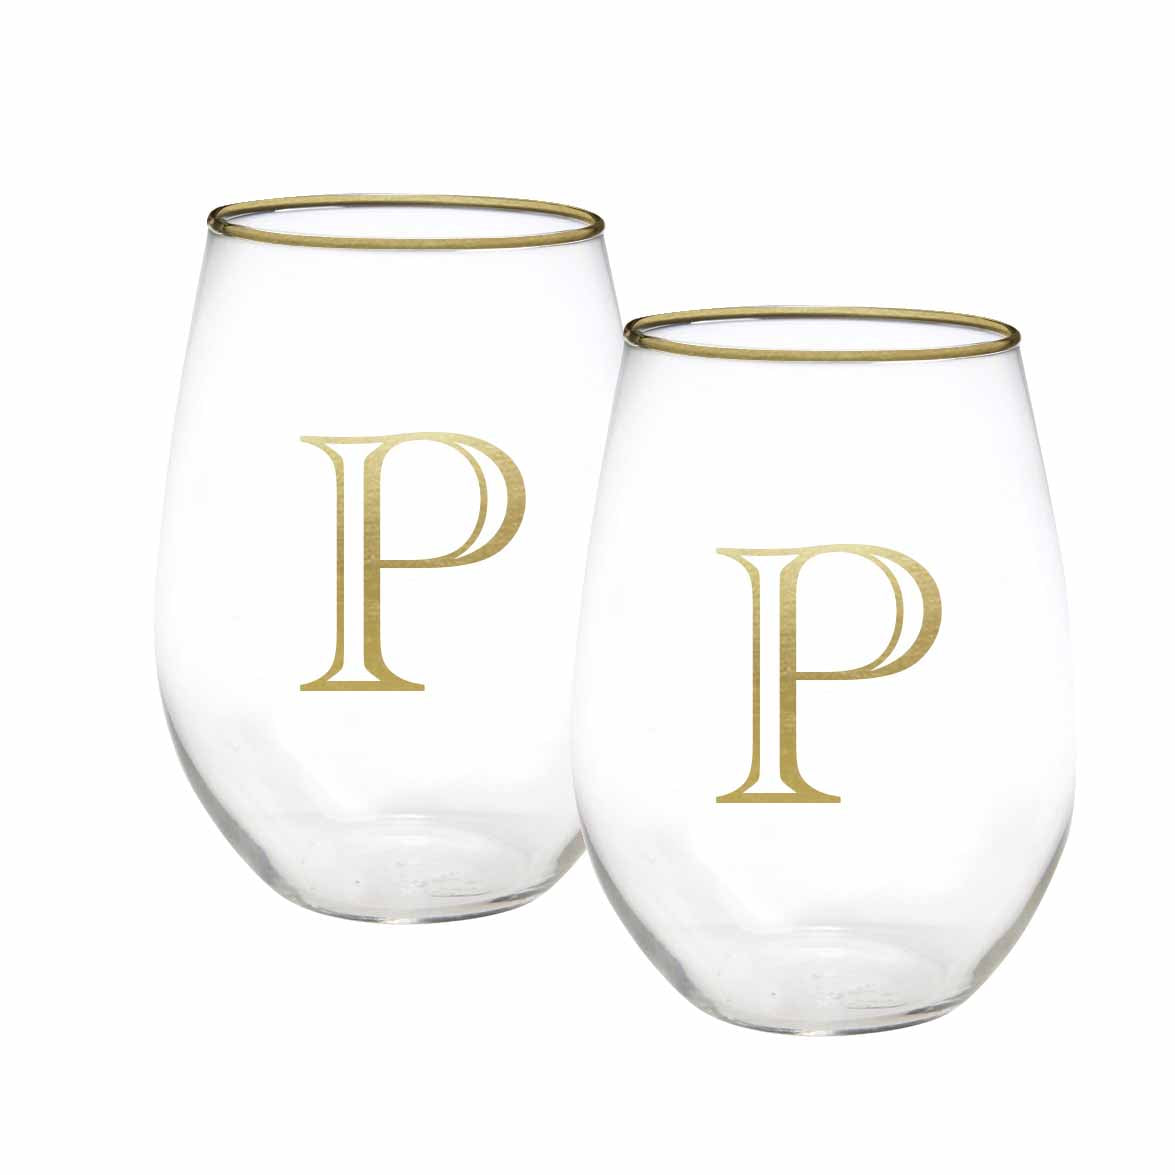 William & Mary Stemless Wine Glasses - Set of 2 at M.LaHart & Co.